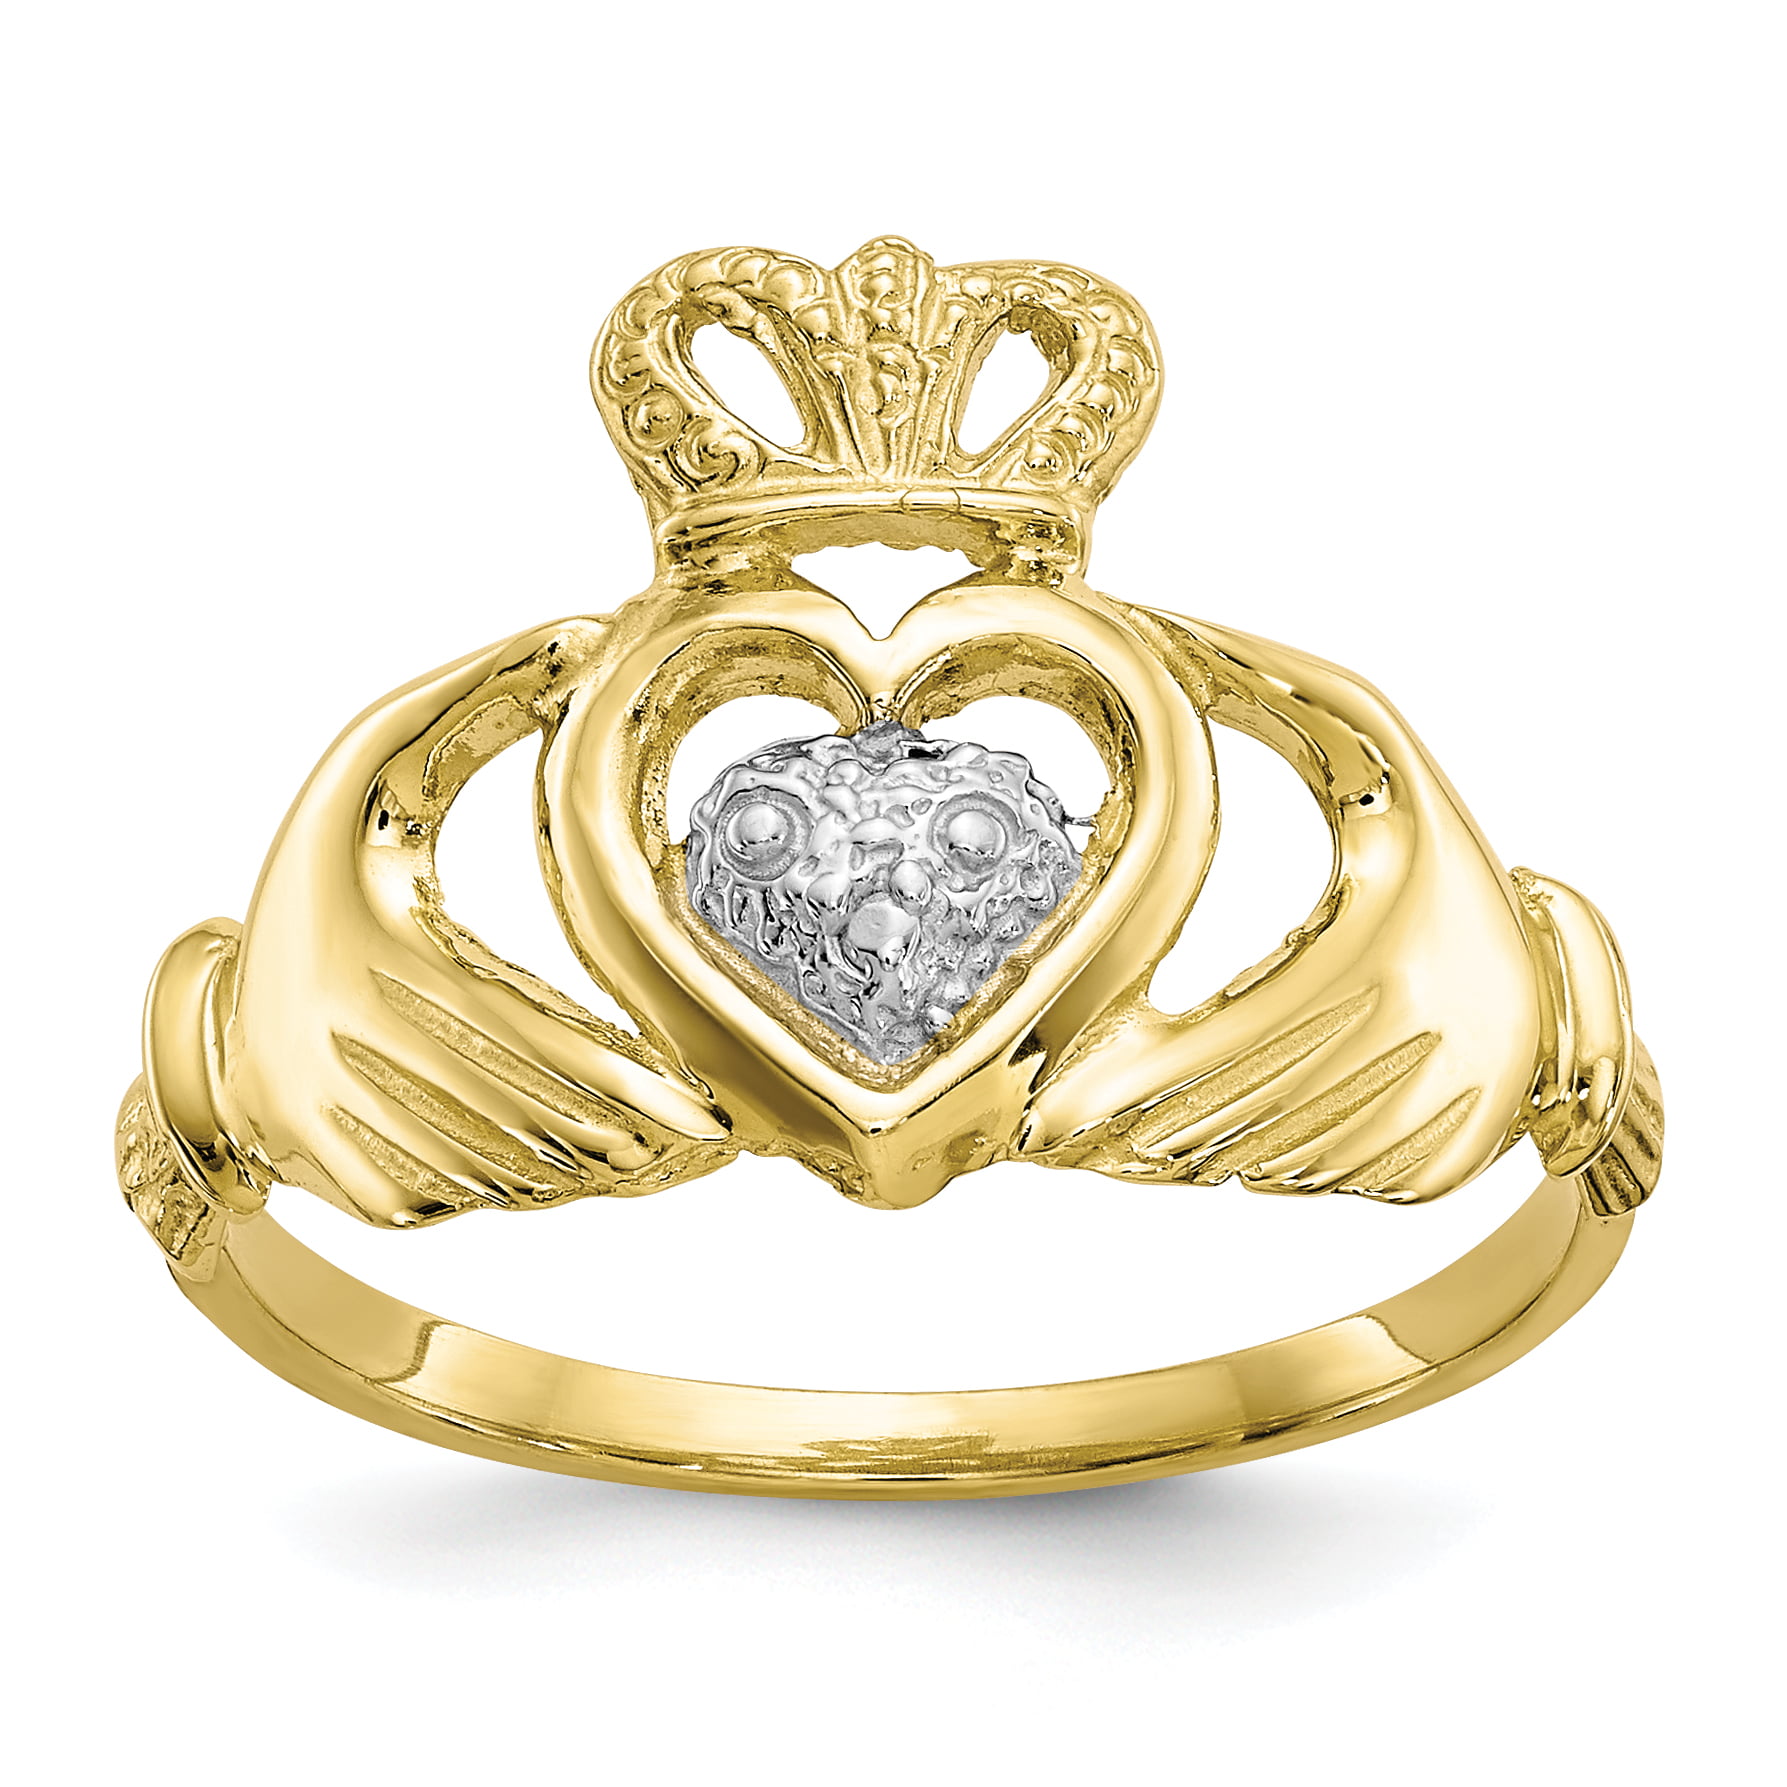 Primal Gold - Primal Gold 10 Karat Yellow Gold and With Rhodium-plated ...